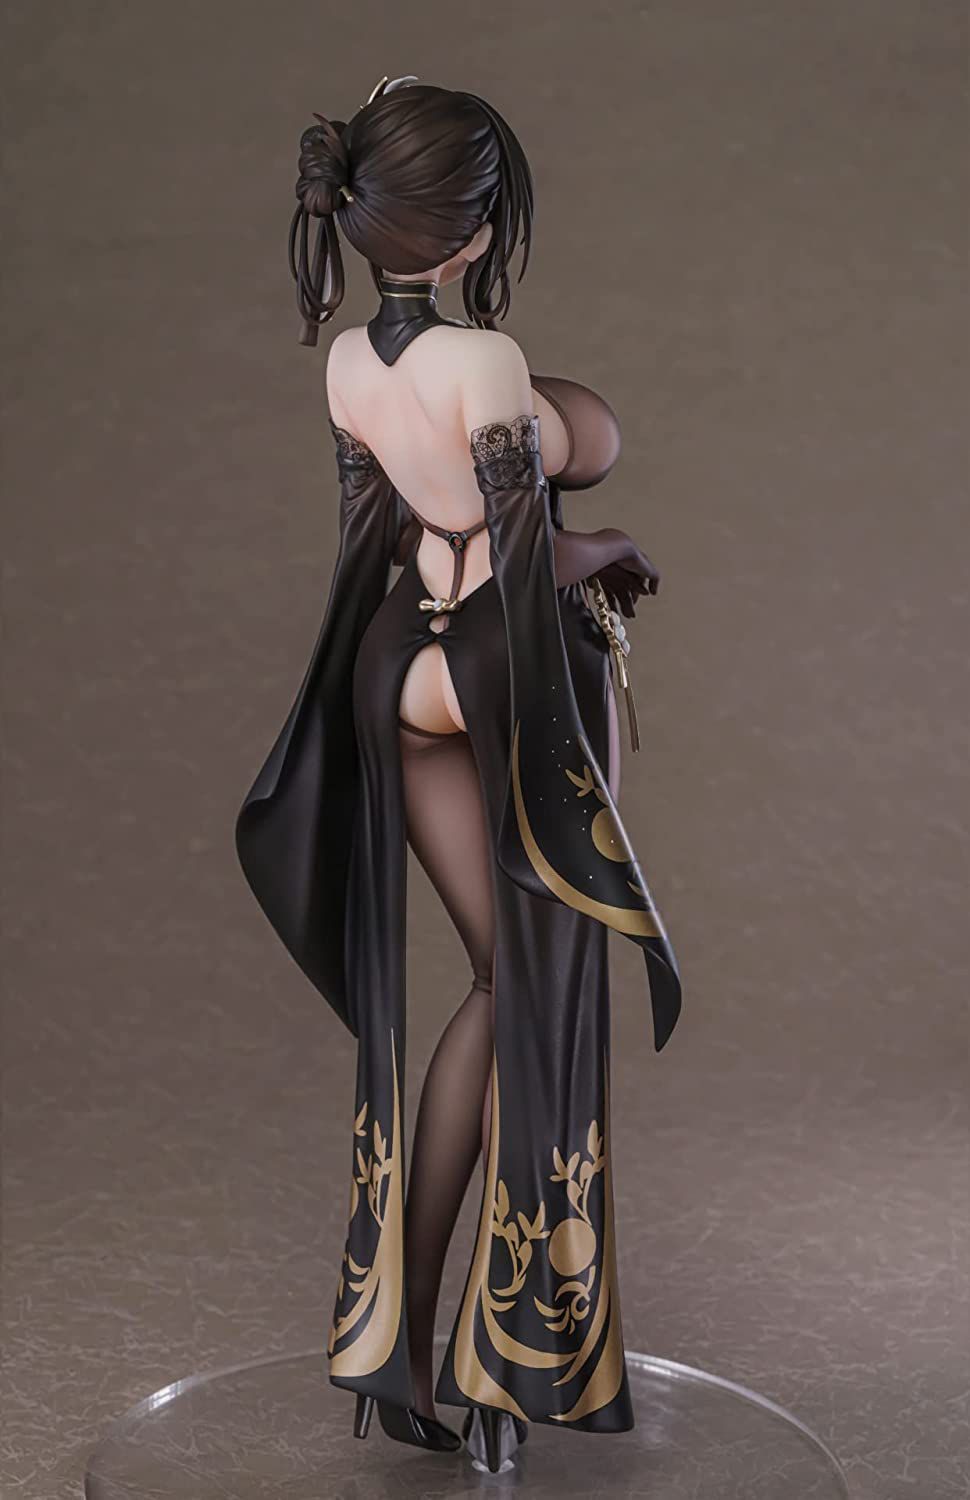 "Azure Lane" A ridiculously erotic figure with a full view of the back and buttocks from behind with the whip of the sea 9